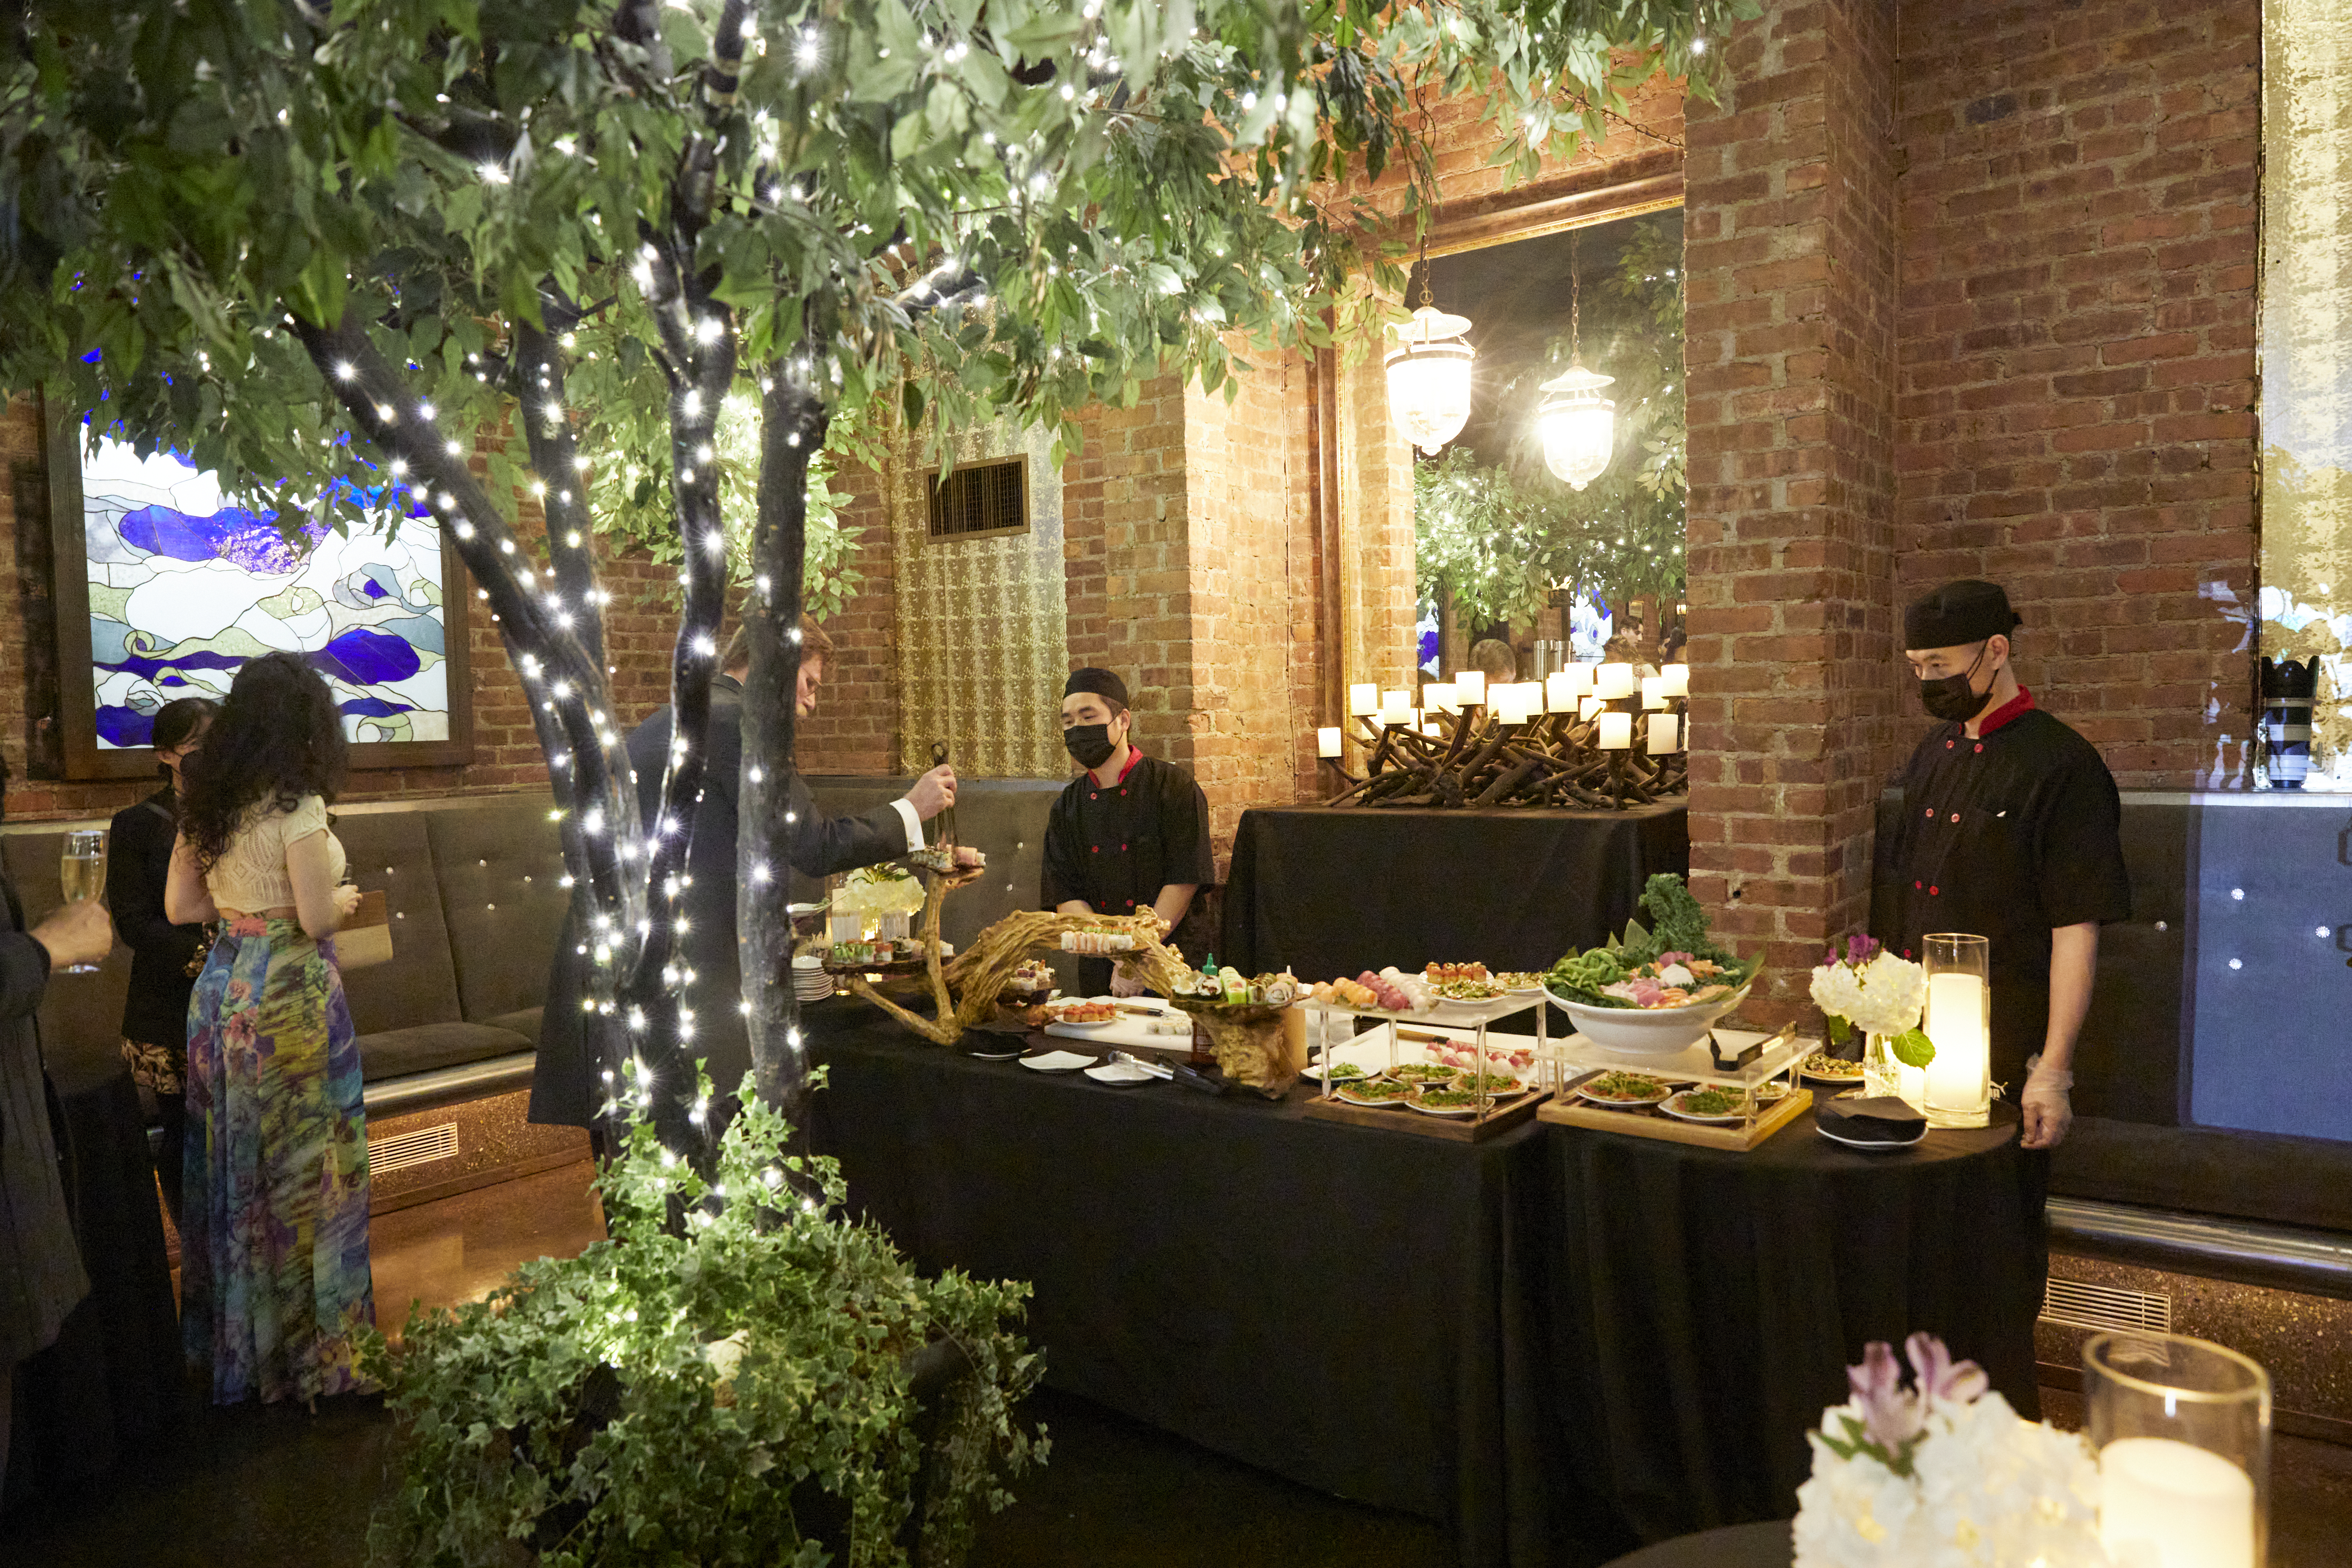 More Sushi Please!  Deity Events Offering Sushi Catering